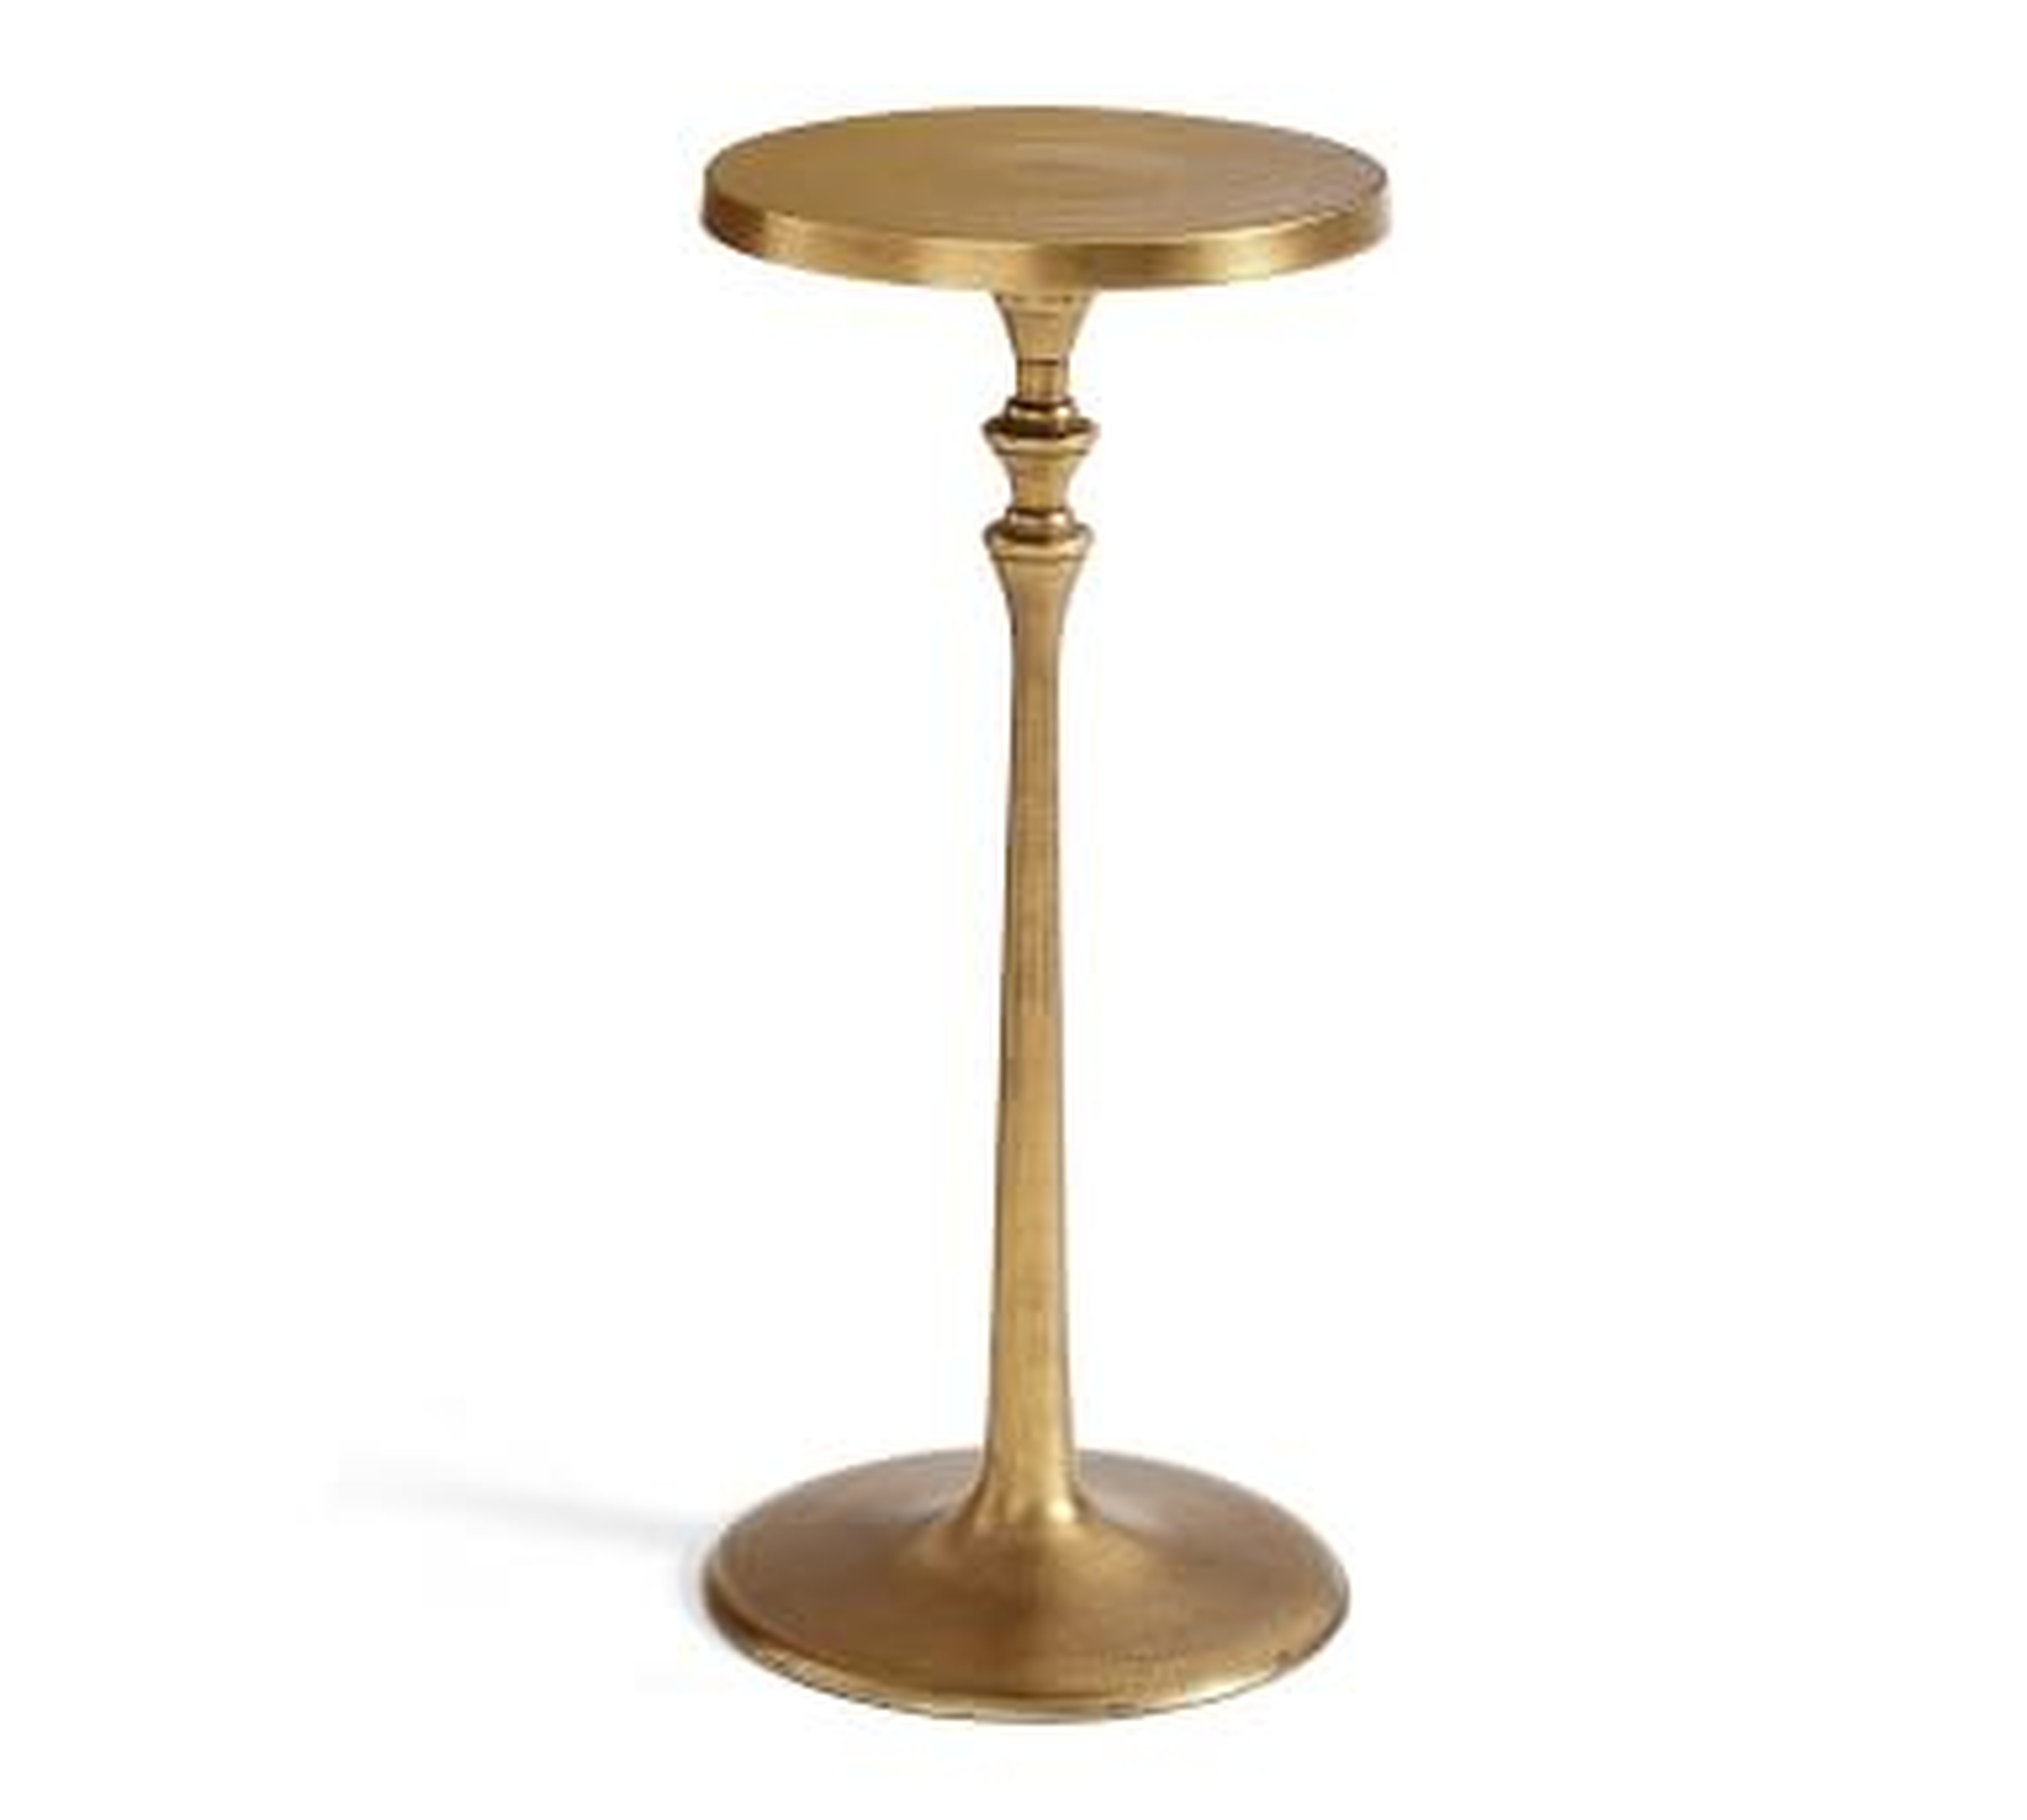 Round 9.5" Metal Cocktail Table, Antique Brass - Pottery Barn